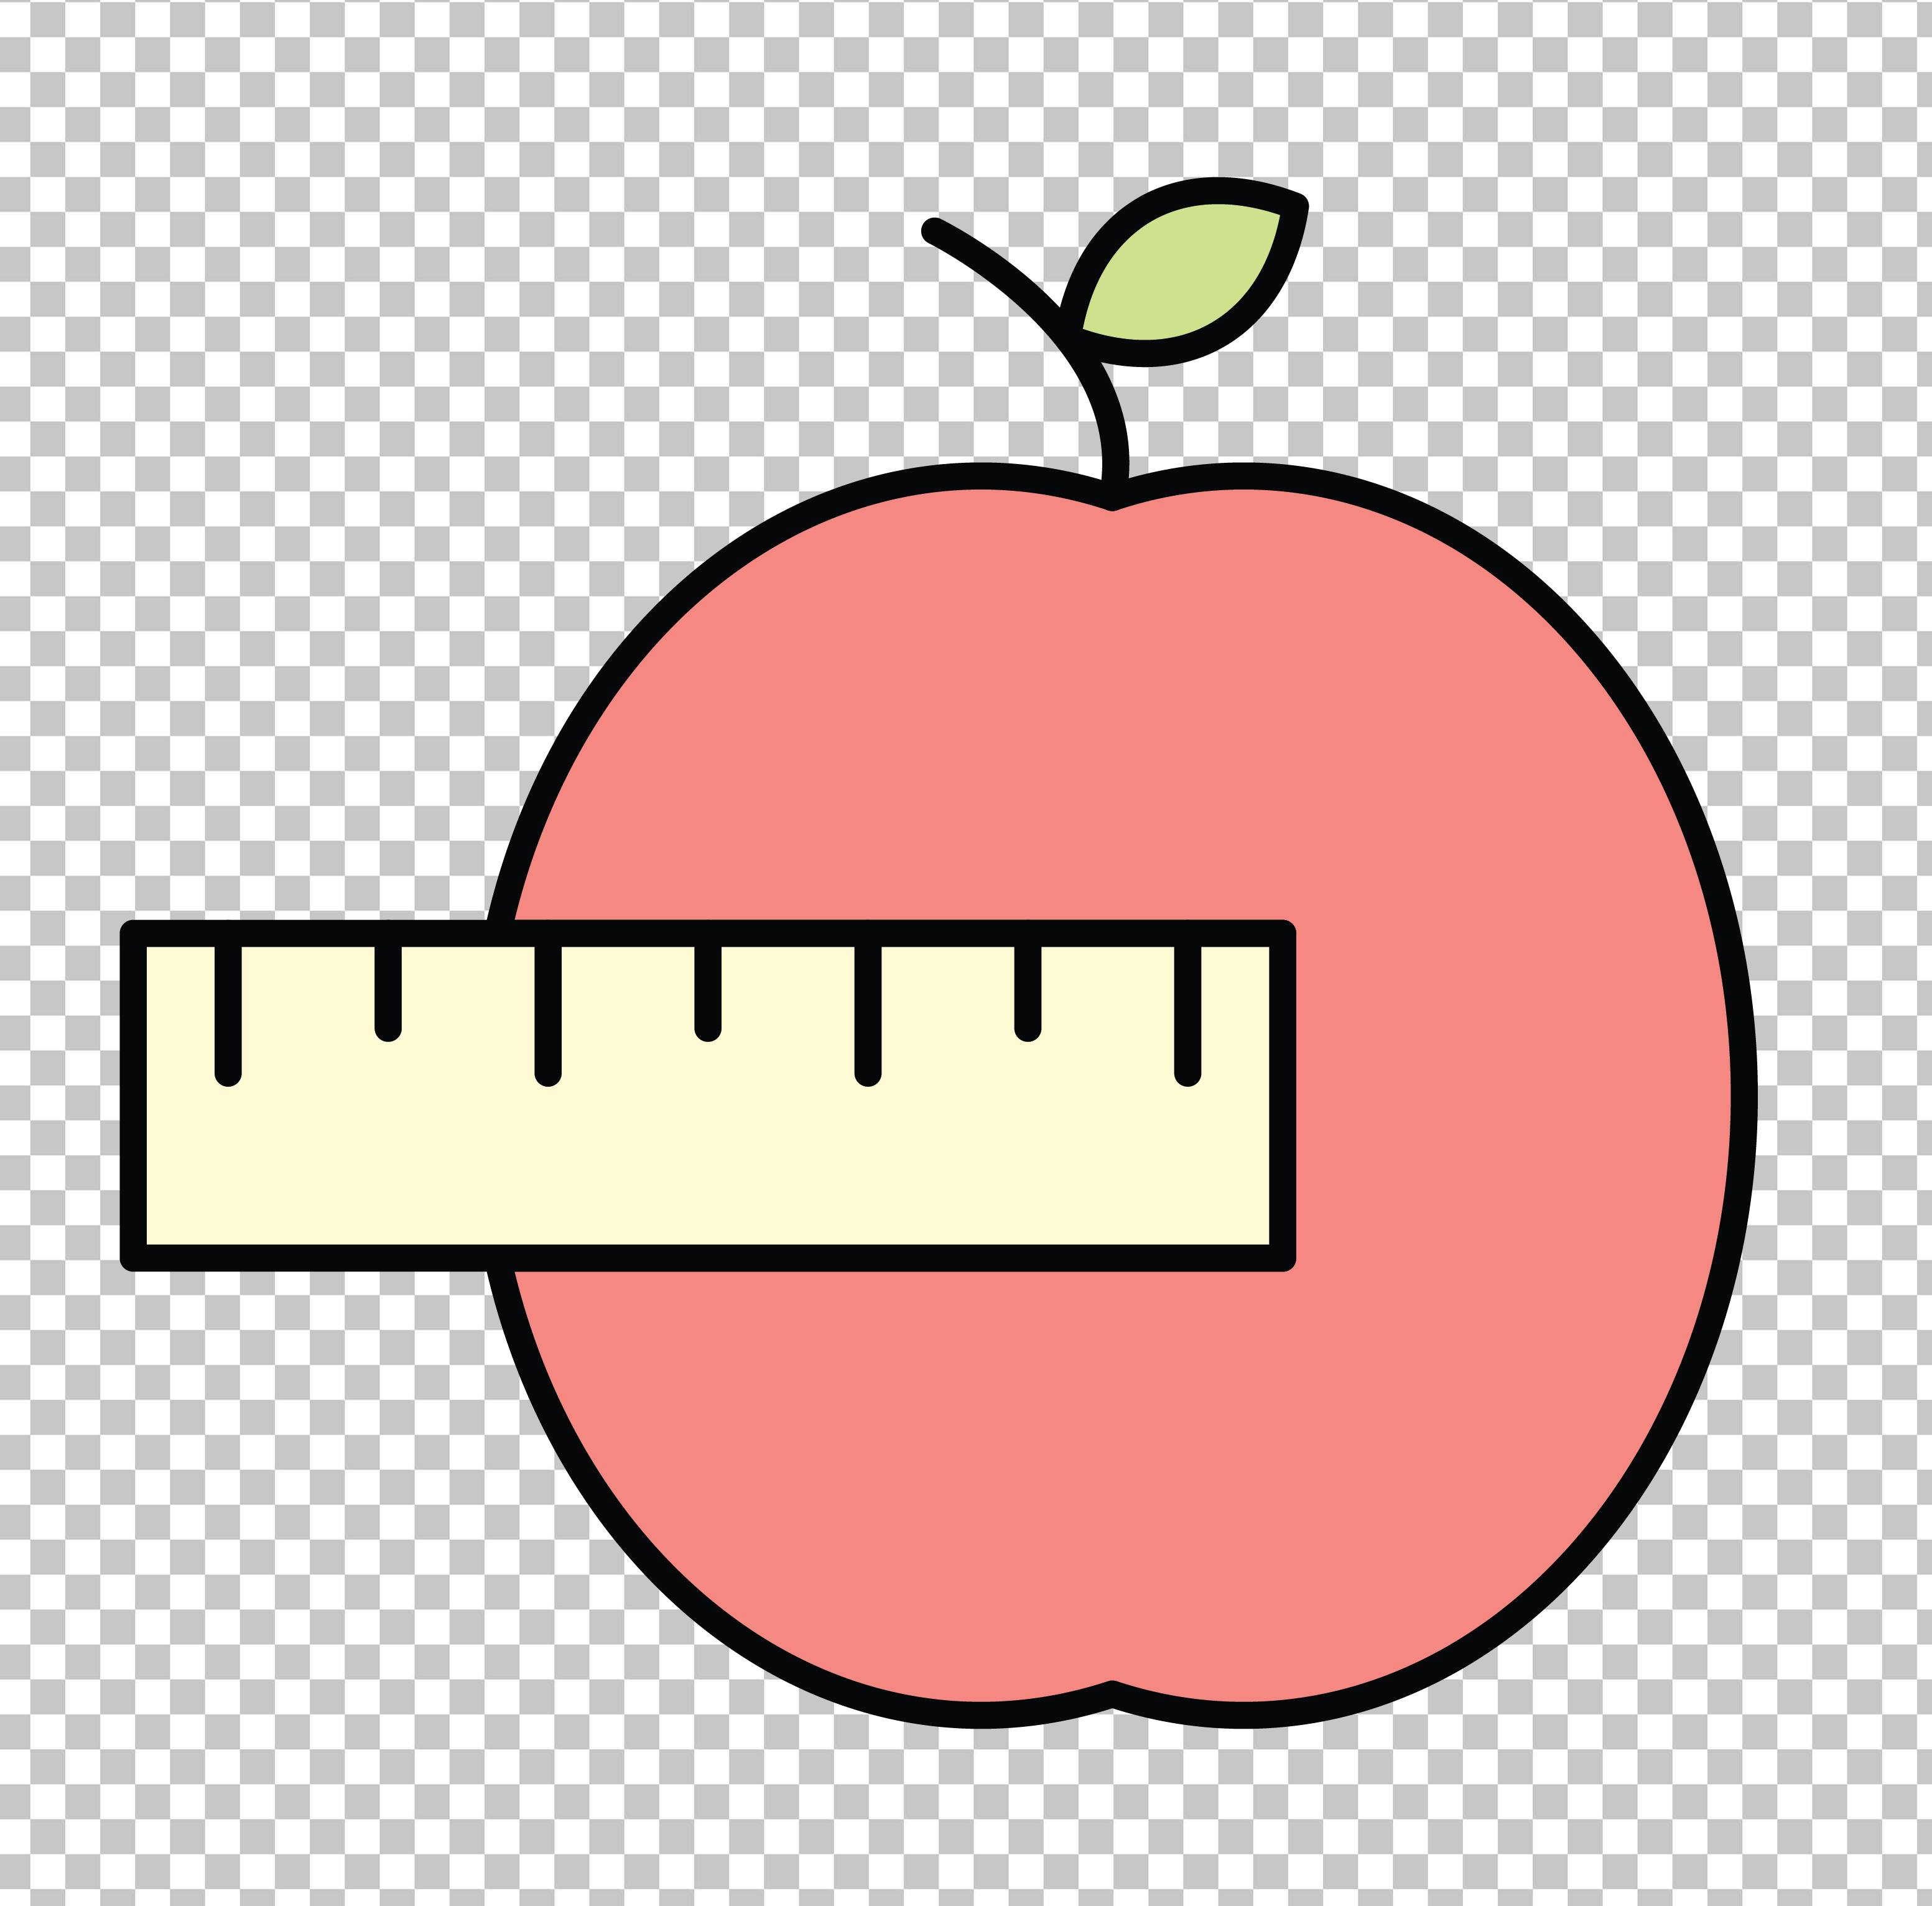 Pink apple with measuring tape.